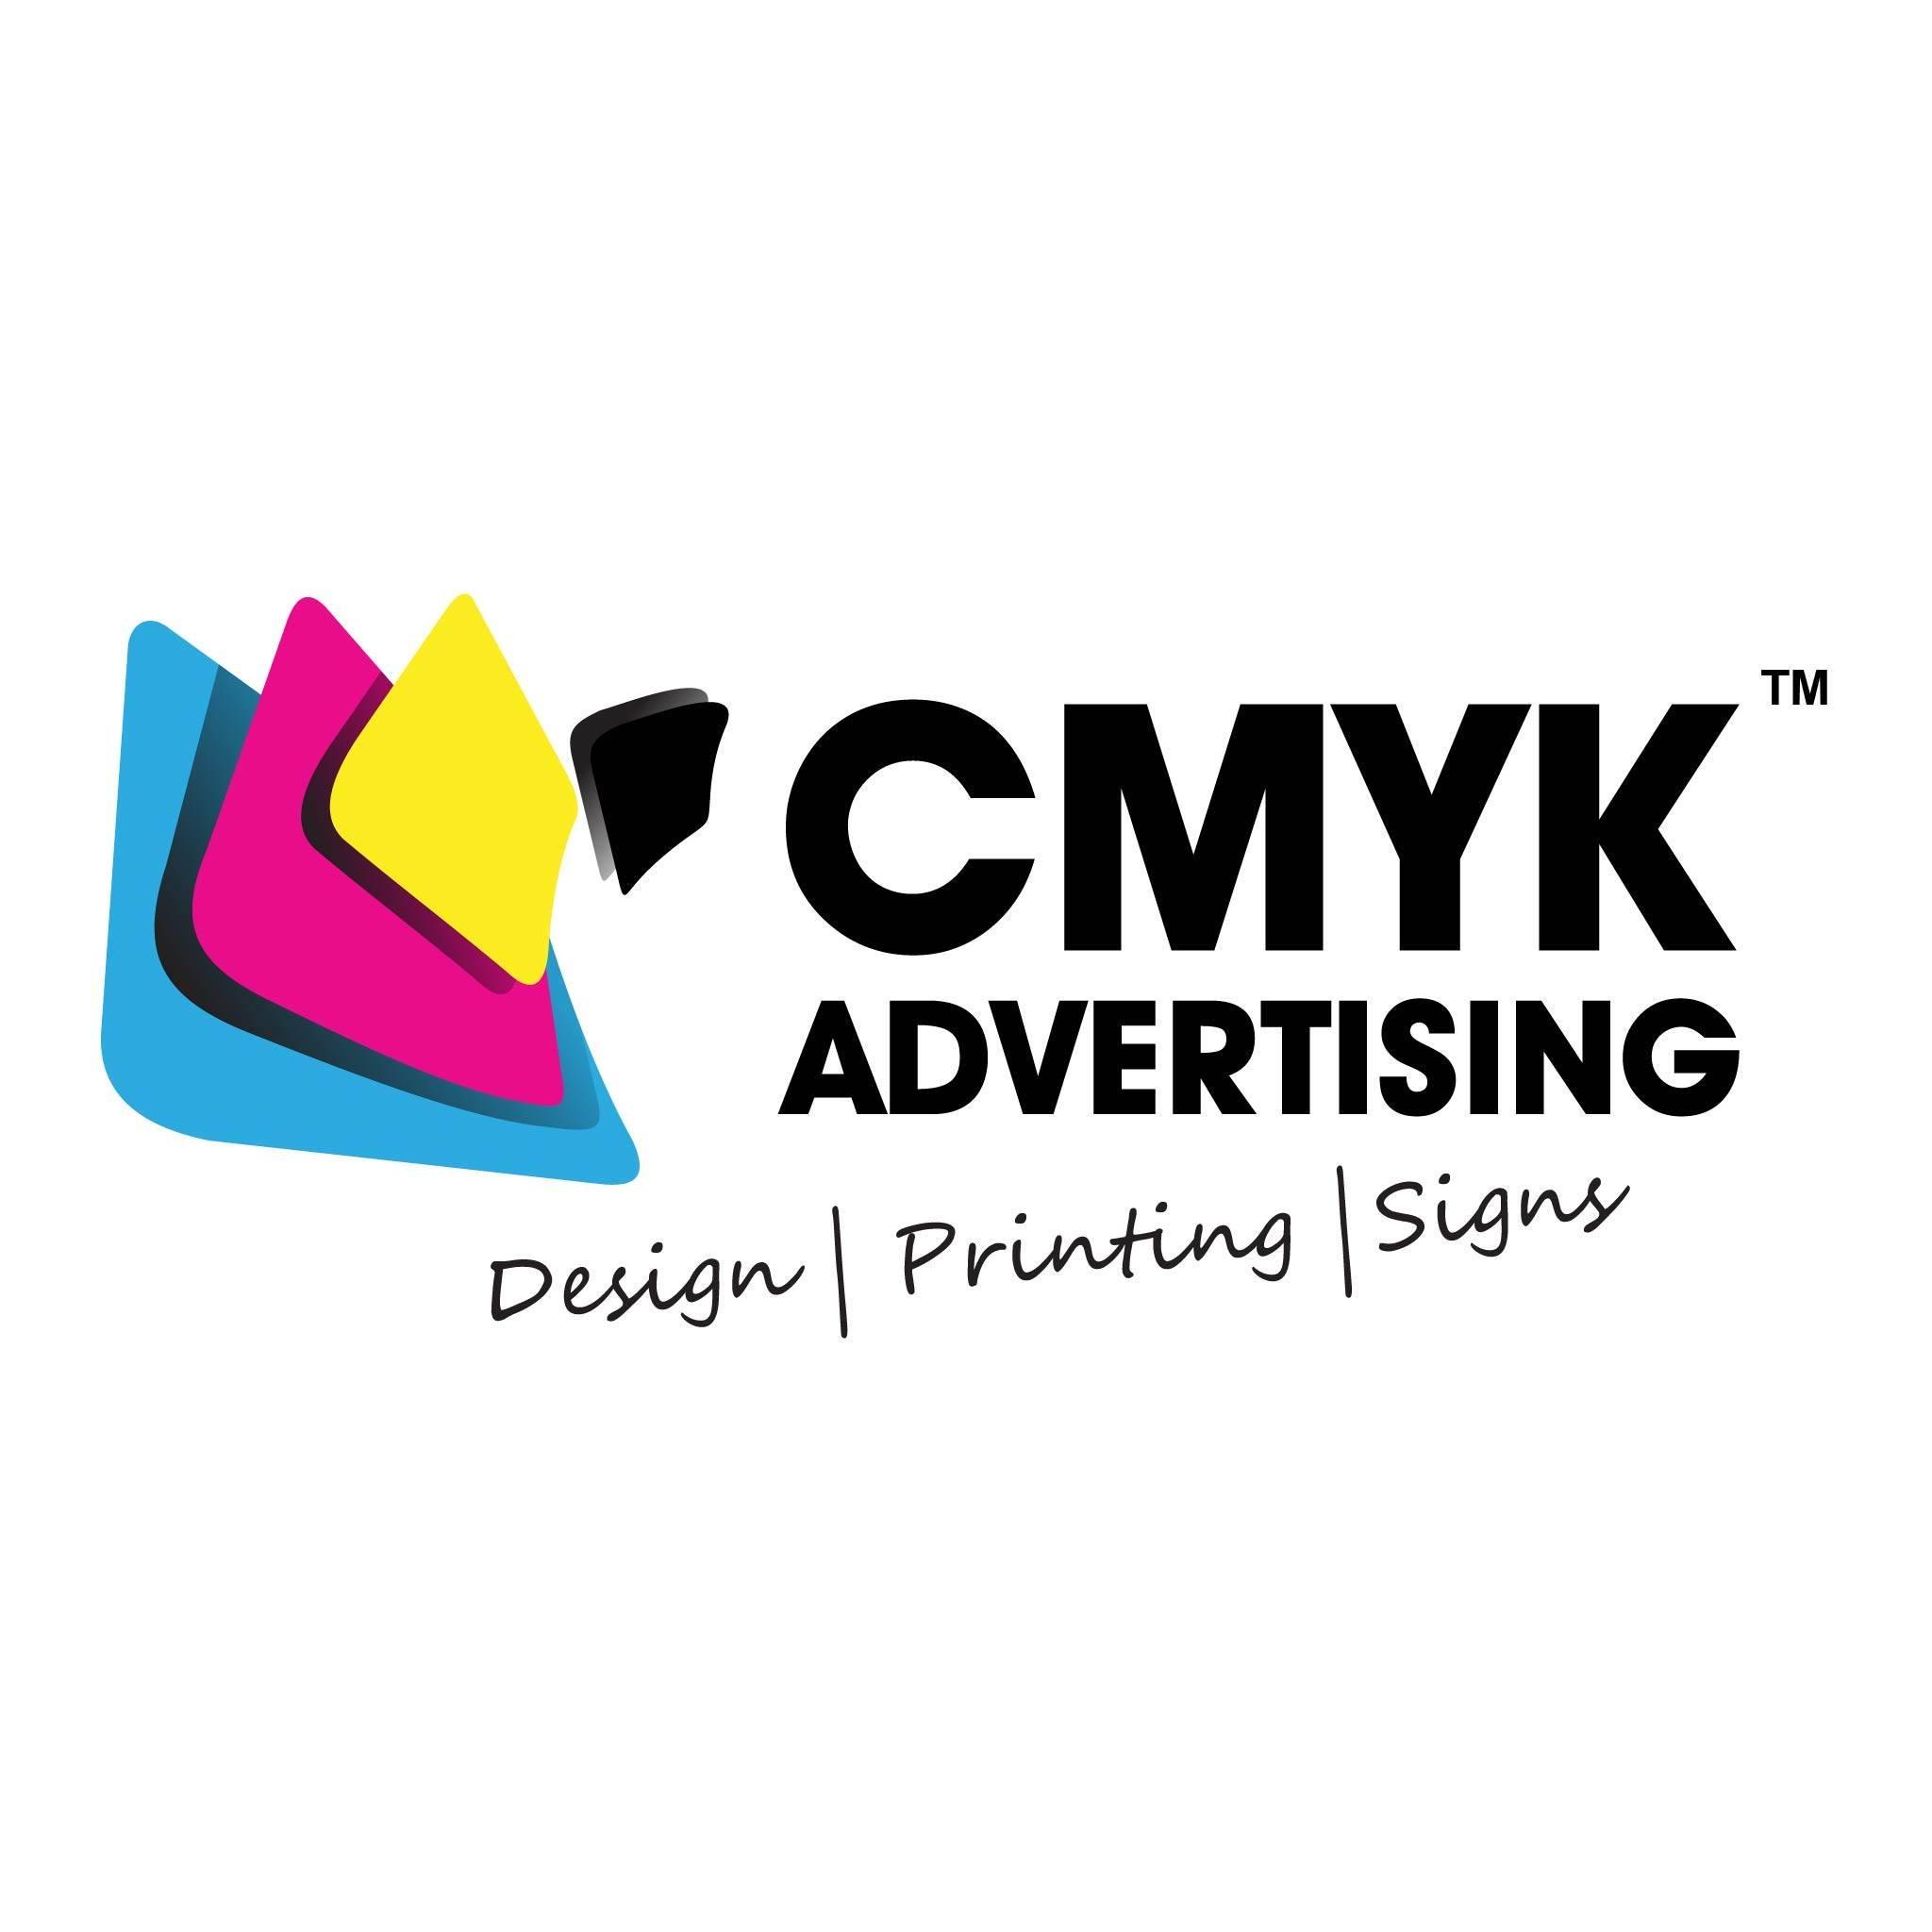 CMYK Advertising profile on Qualified.One